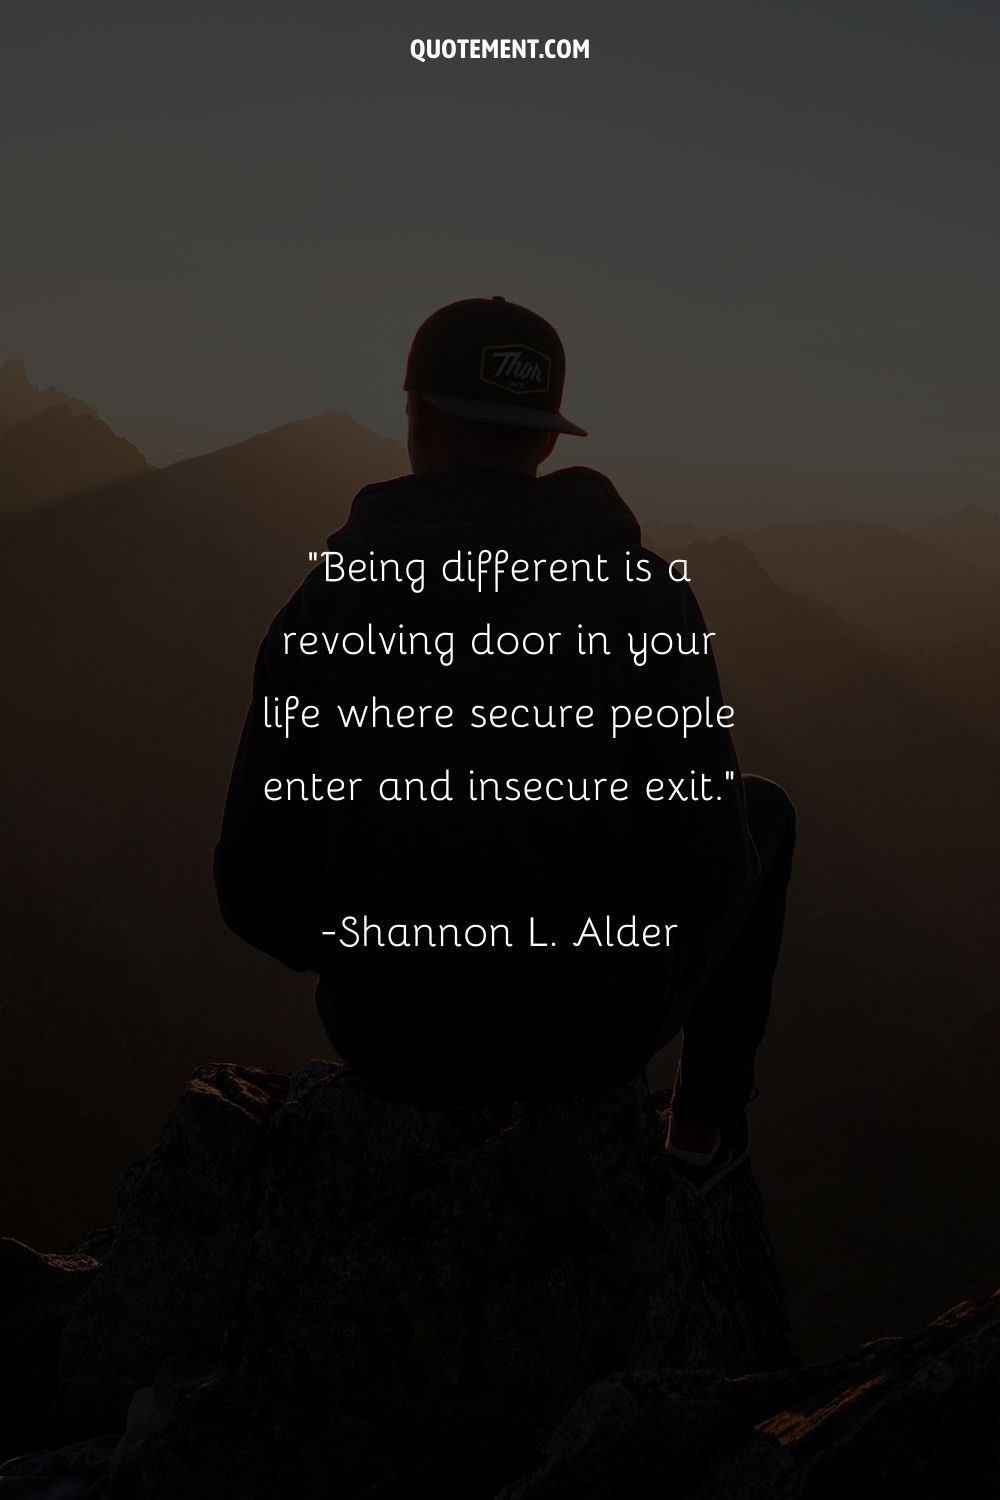 Being different is a revolving door in your life where secure people enter and insecure exit.